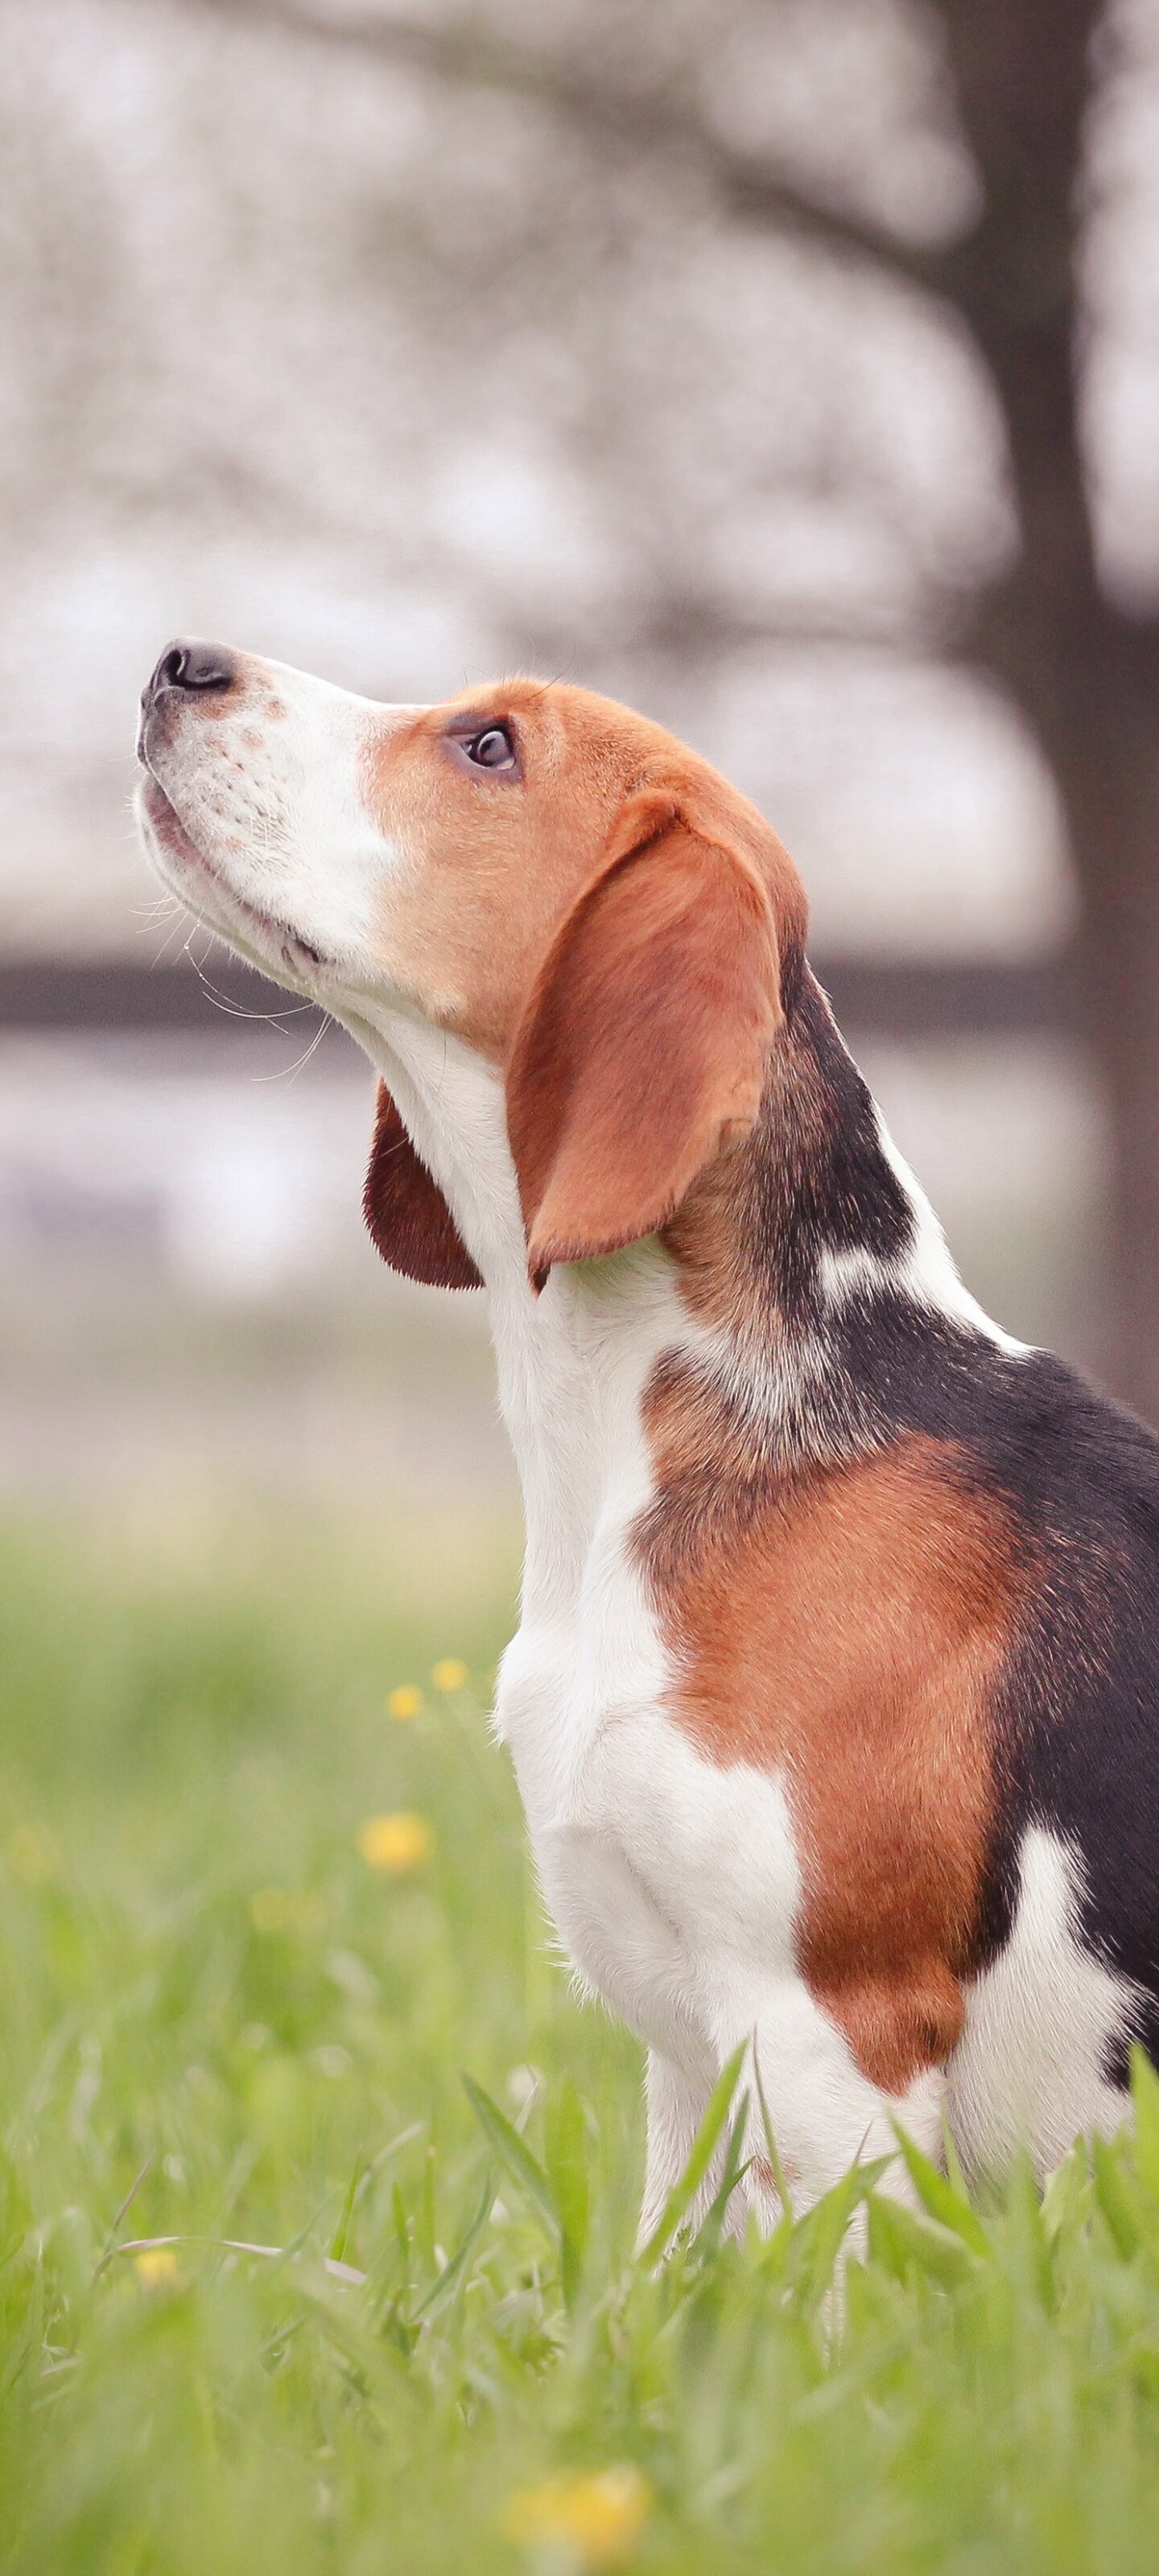 Beagle: Was accepted as a breed by the American Kennel Club (AKC) in 1885. 1440x3200 HD Wallpaper.